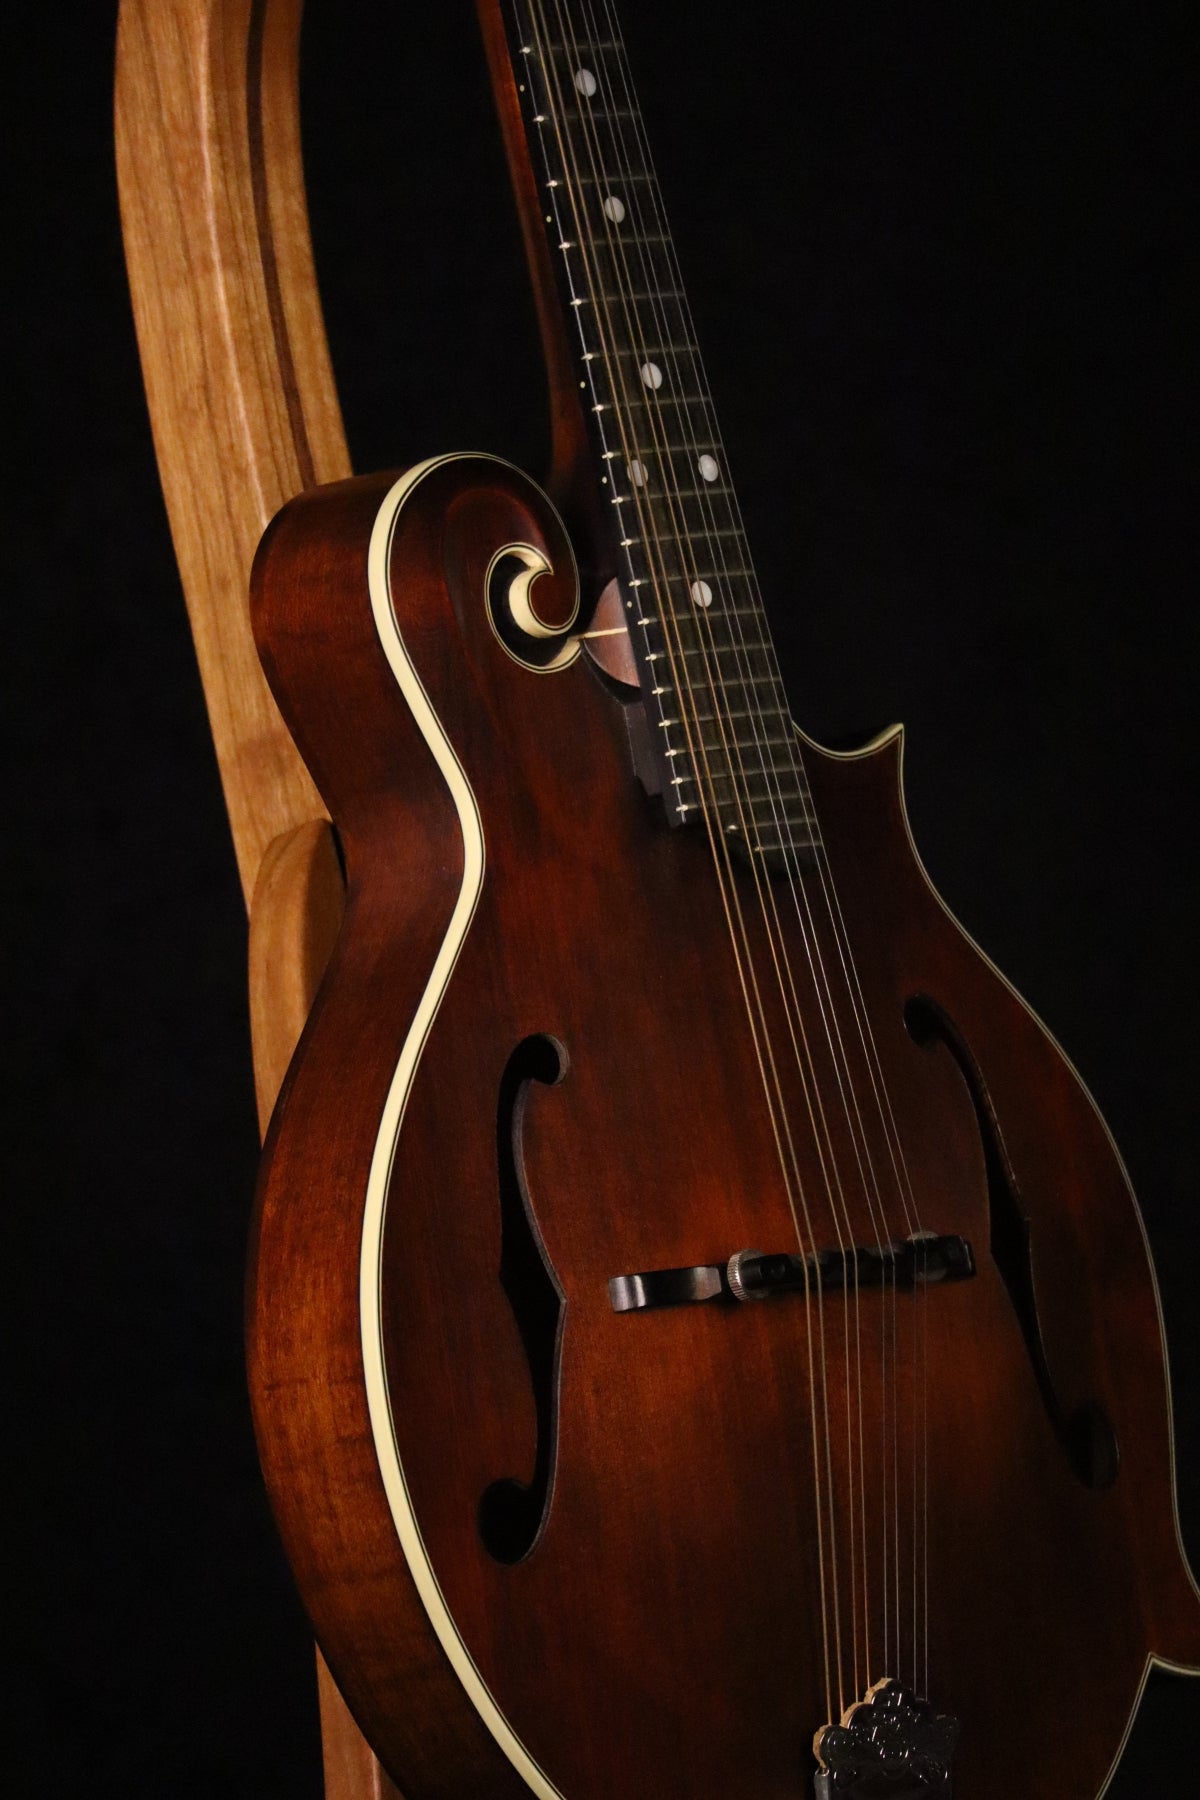 Folding cherry and walnut wood mandolin floor stand closeup front image with Eastman mandolin